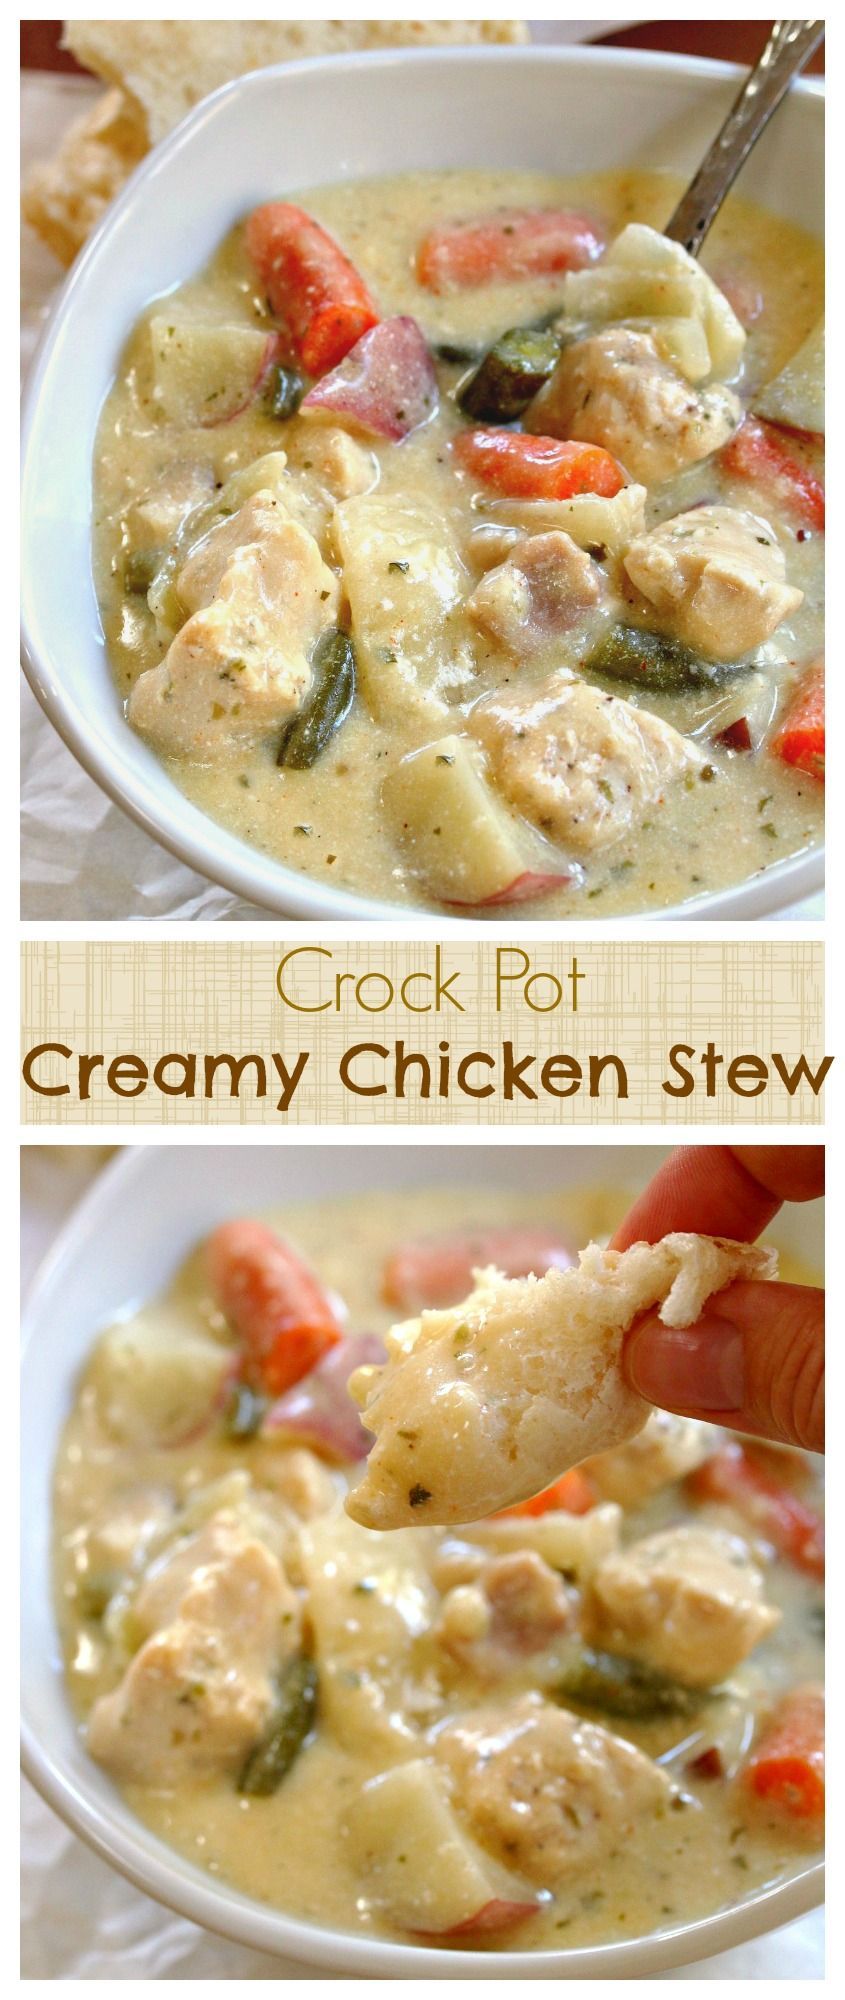 Thick and creamy chicken stew made easily right in the crock pot. The perfect comfort food and delicious s